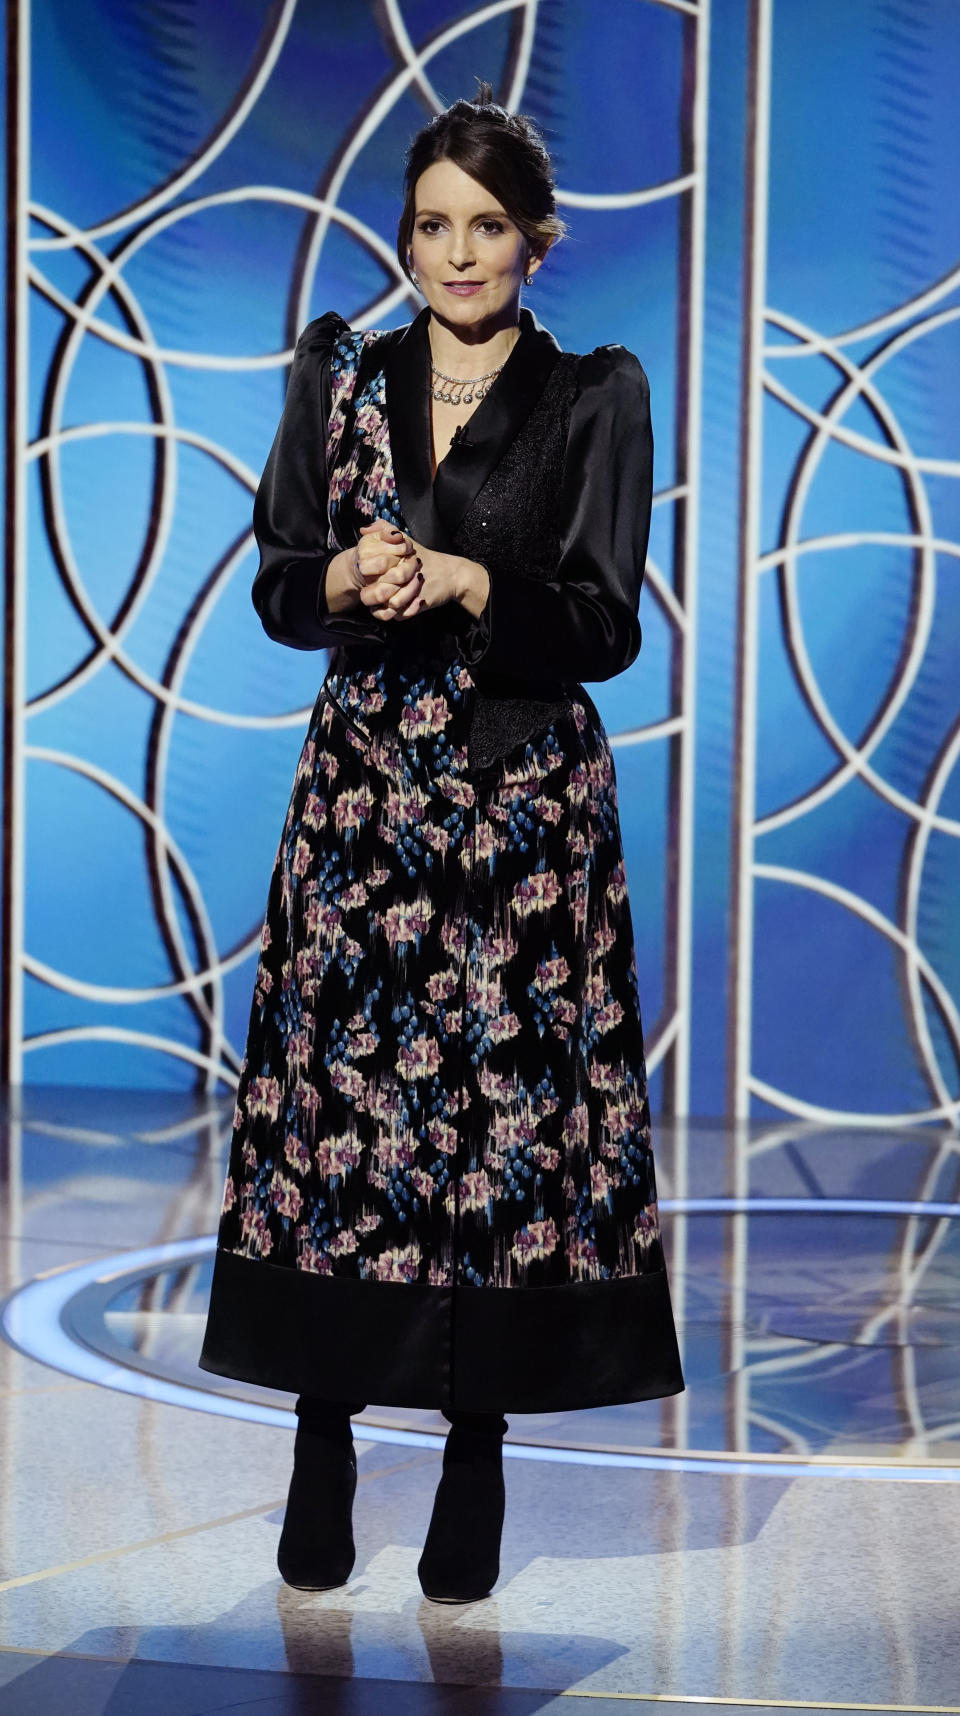 78th ANNUAL GOLDEN GLOBE AWARDS -- Pictured: Co-host Tina Fey speaks onstage at the 78th Annual Golden Globe Awards held at the Rainbow Room on February 28, 2021 -- (Photo by: Peter Kramer/NBC)